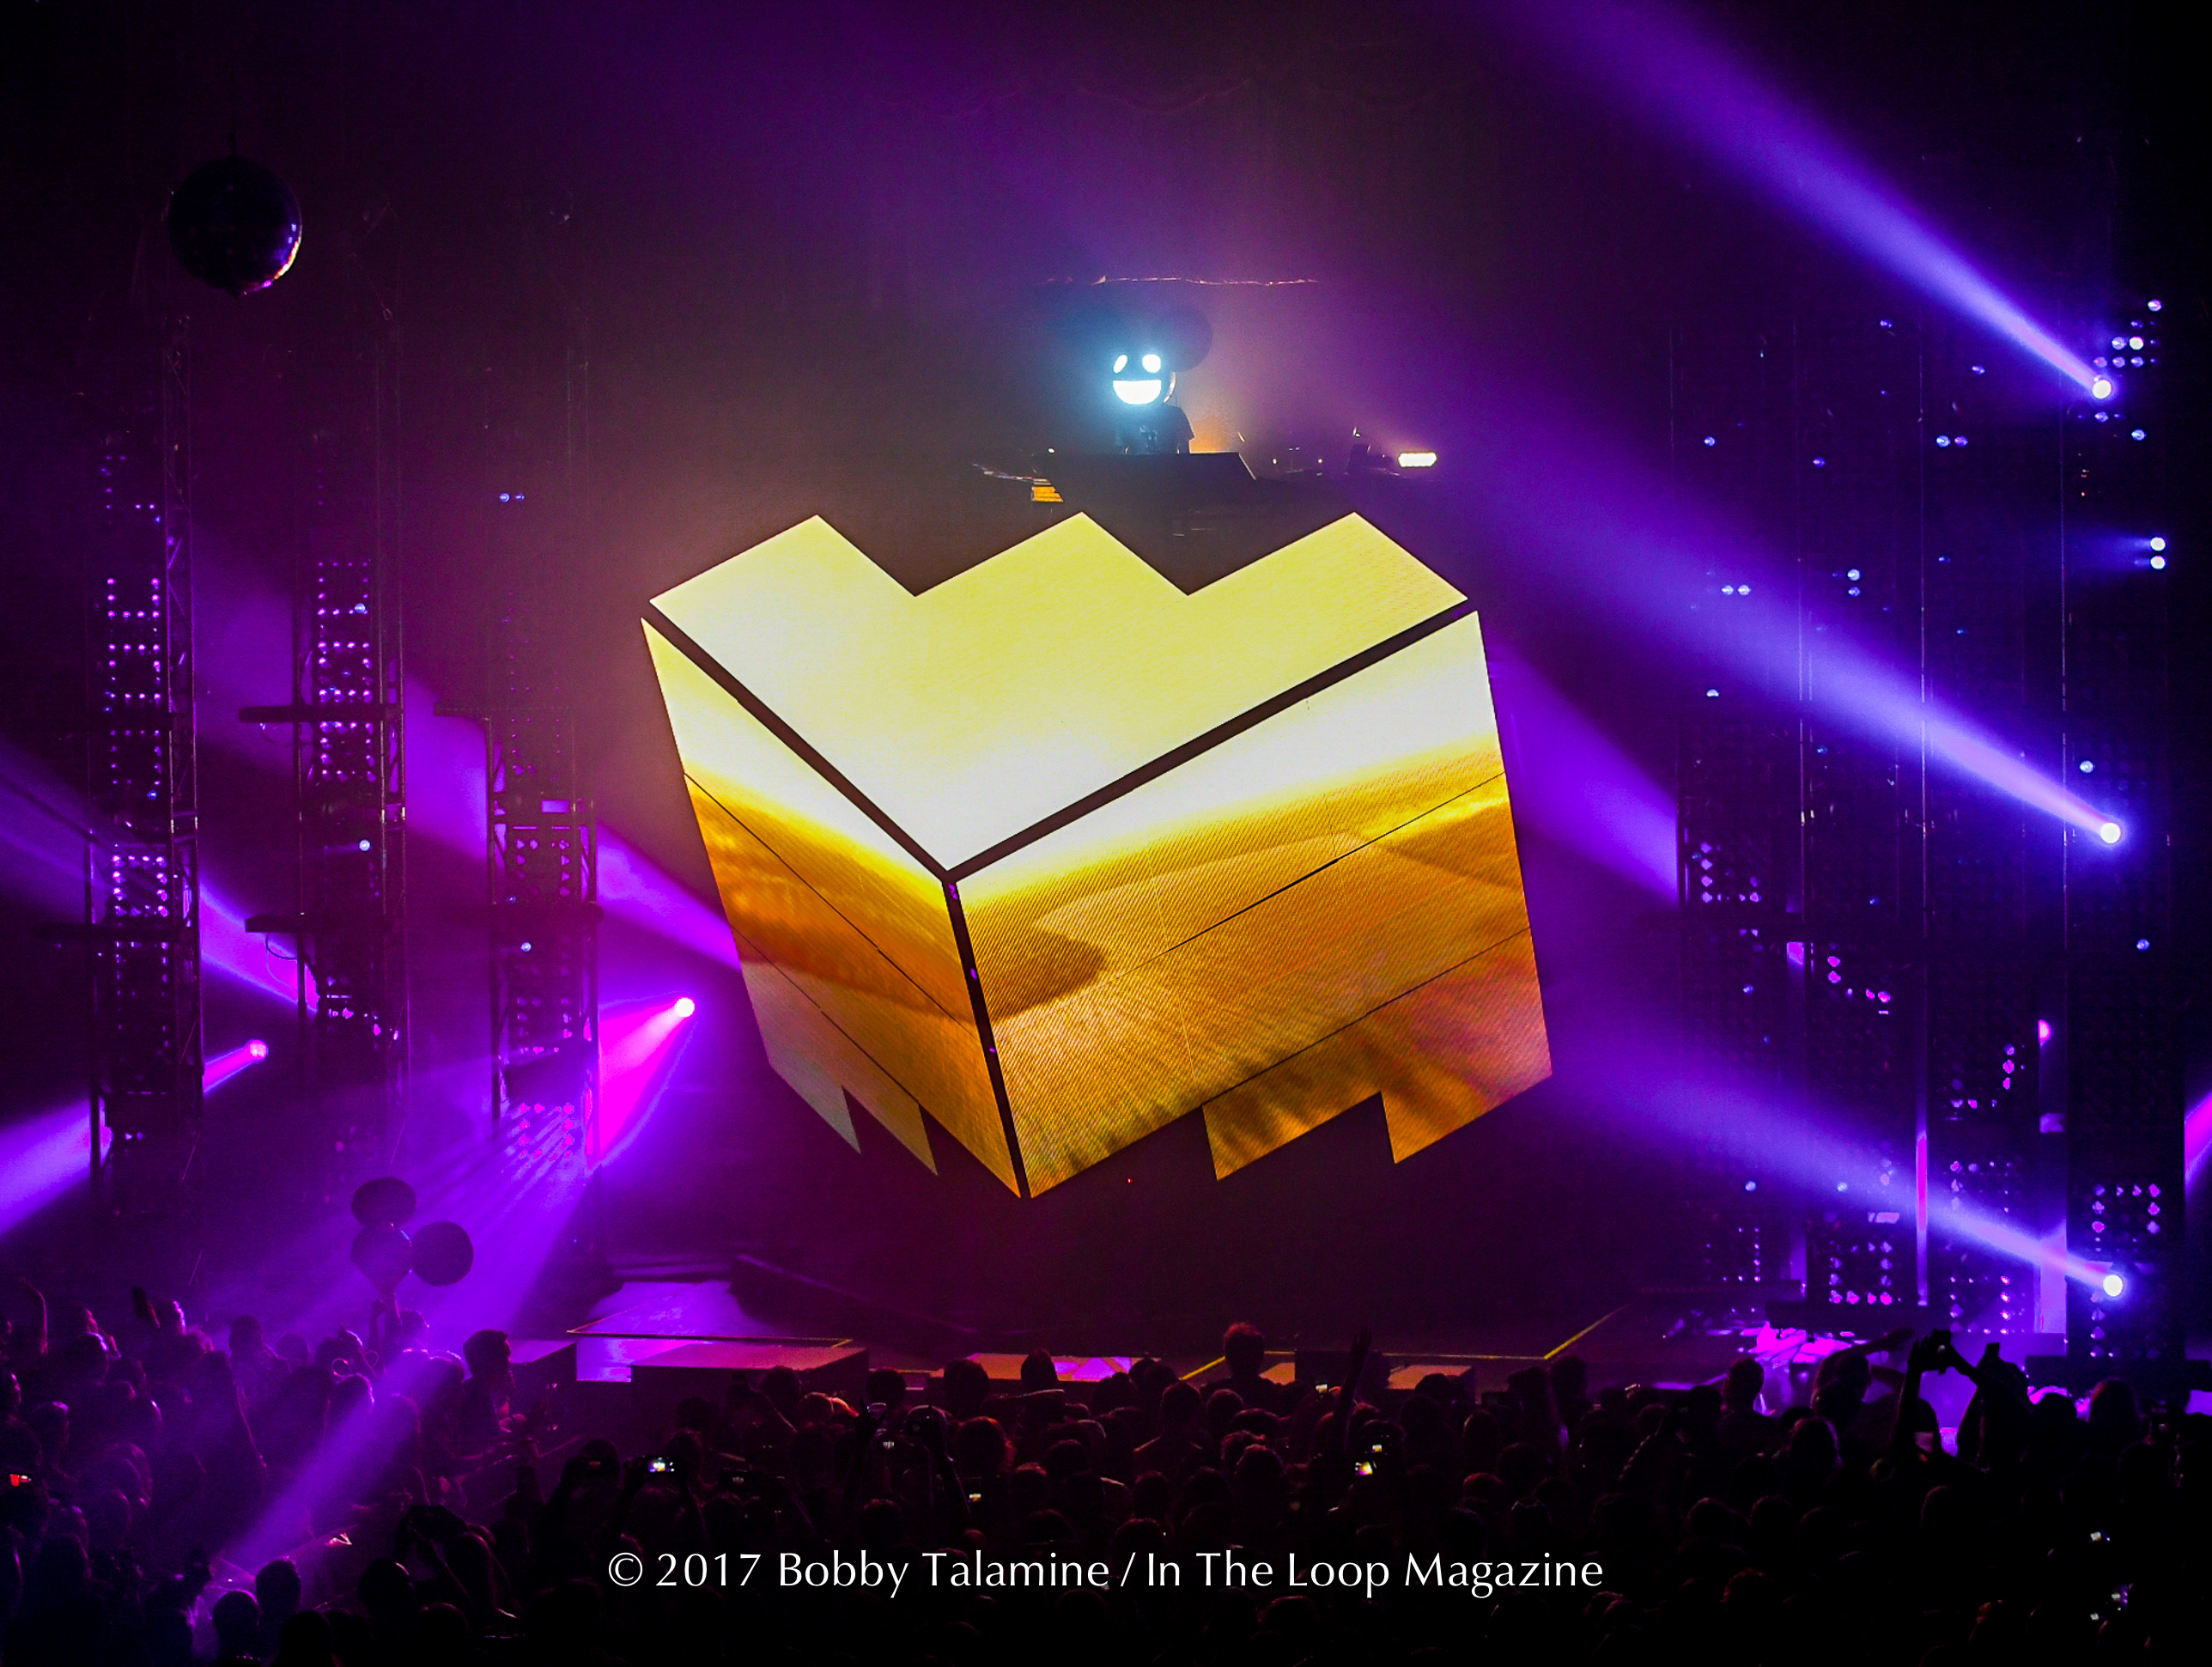 In The Loop Magazine Deadmau5 Brings His New And Massive Cube 2 1 To The Aragon Ballroom In The Loop Magazine